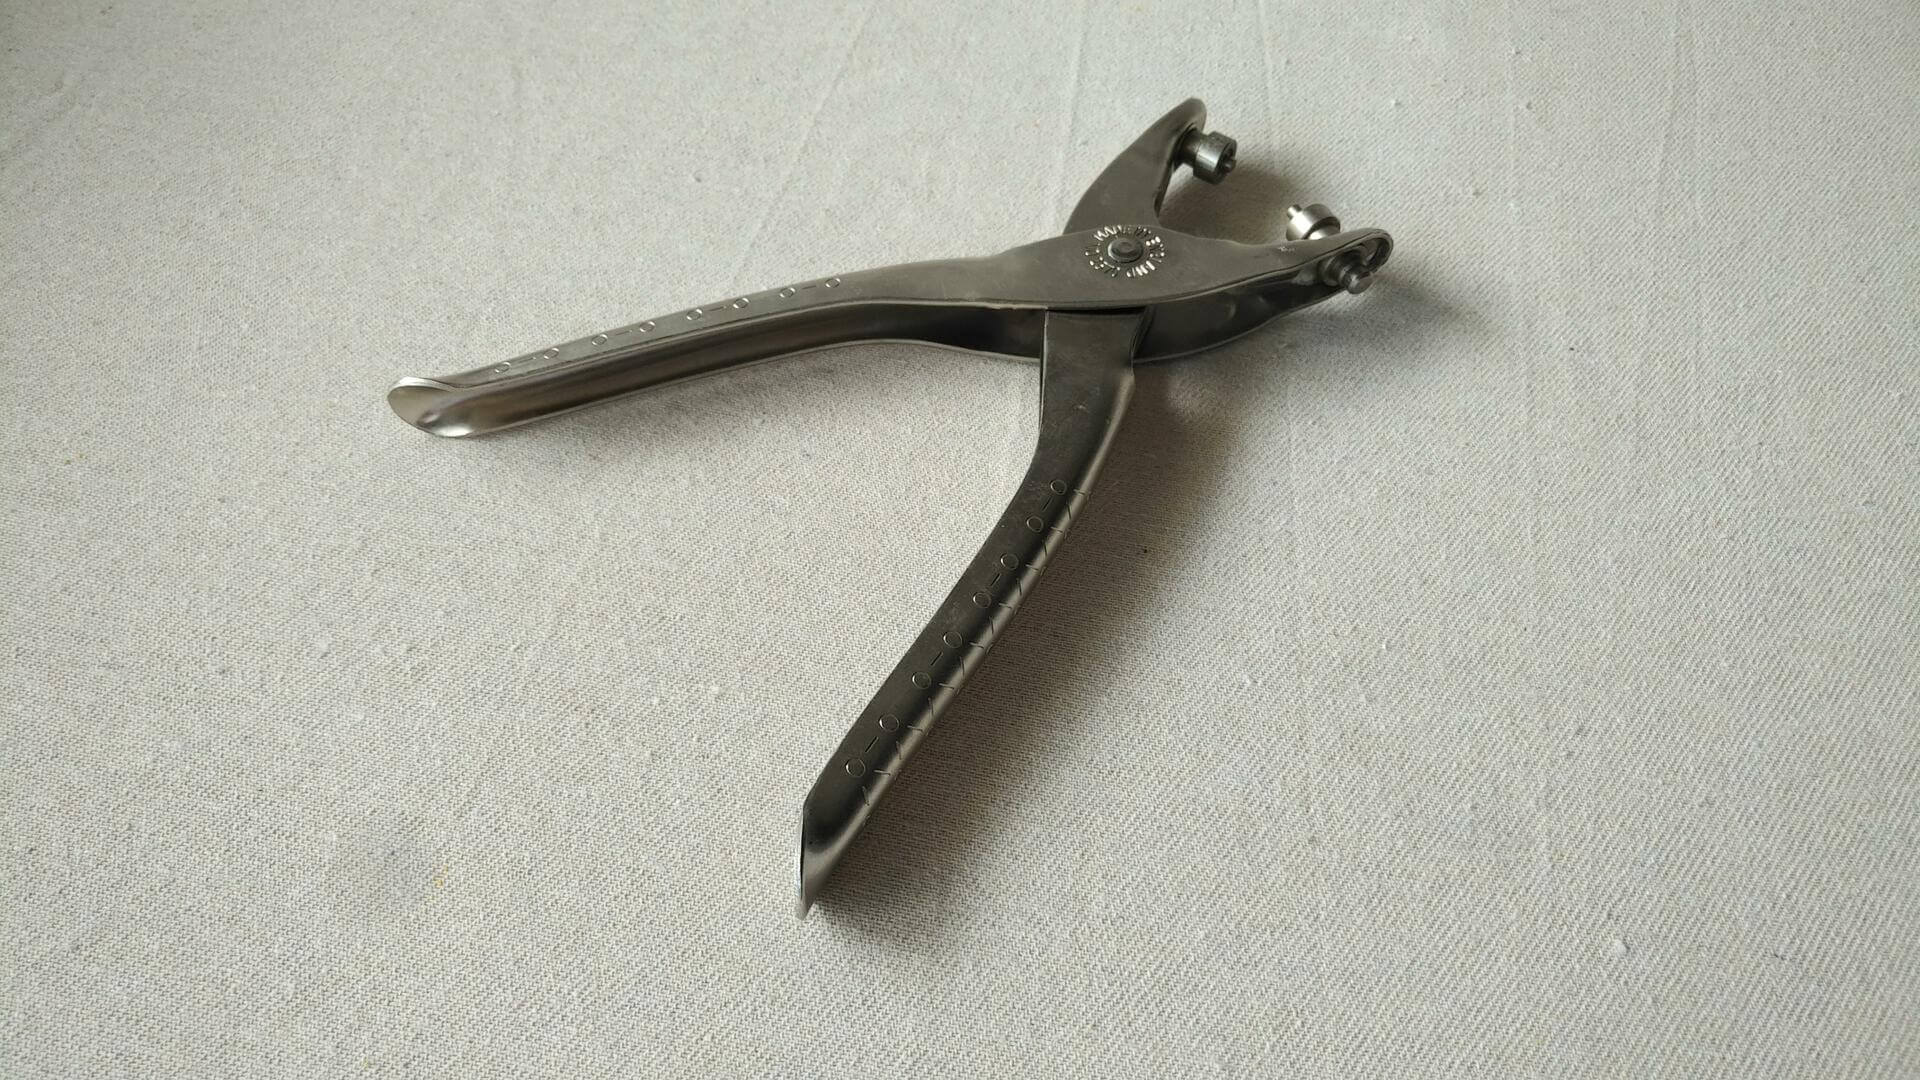 A genuine Maun Industries No 2570-165 punching and eyelet pliers for 5/32" eyelets. Vintage made in England collectible leathercraft hand tools